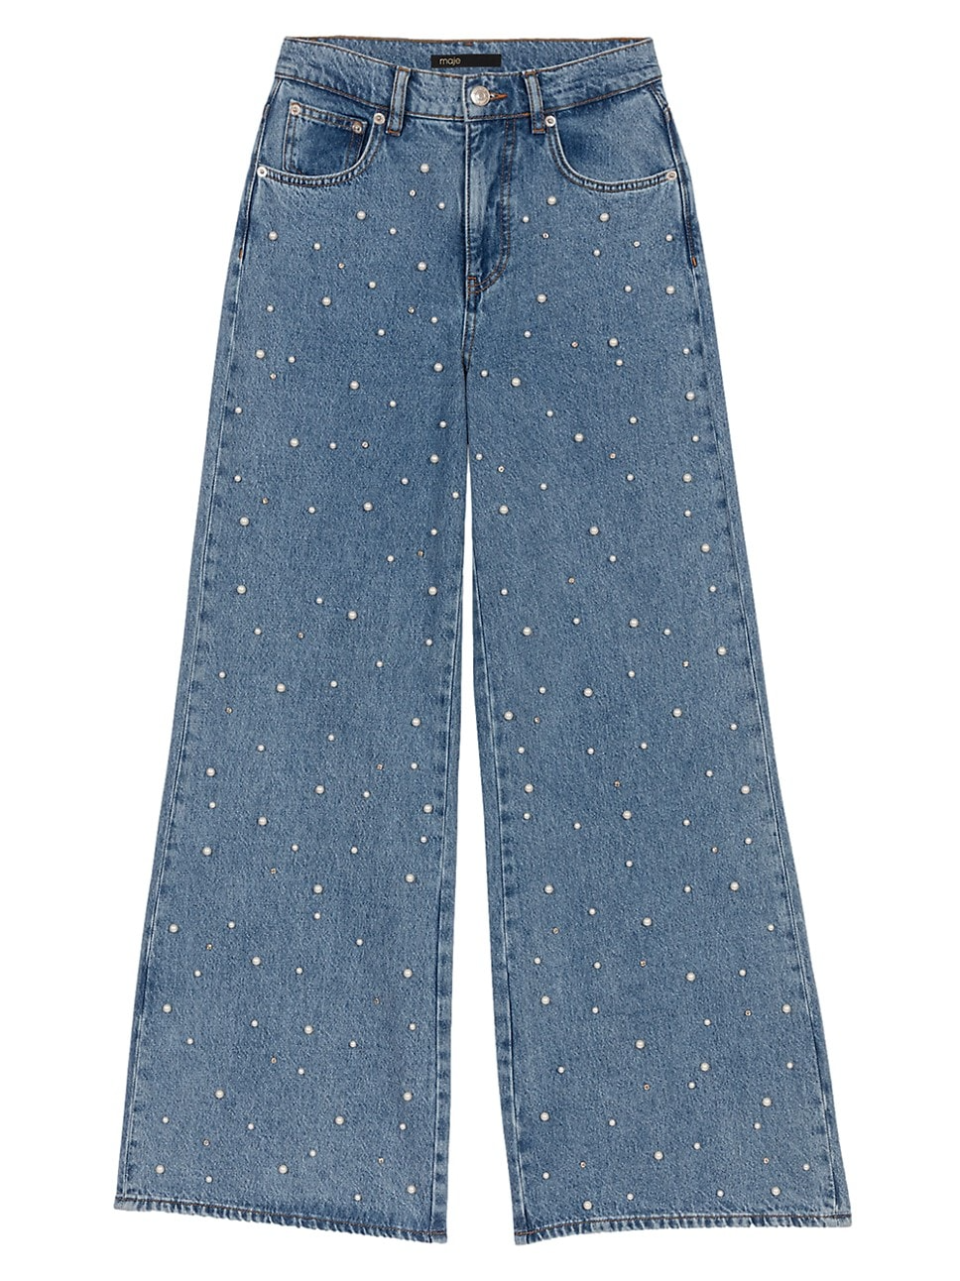 Maje Pearl-Studded High-Rise Wide-Leg Jeans